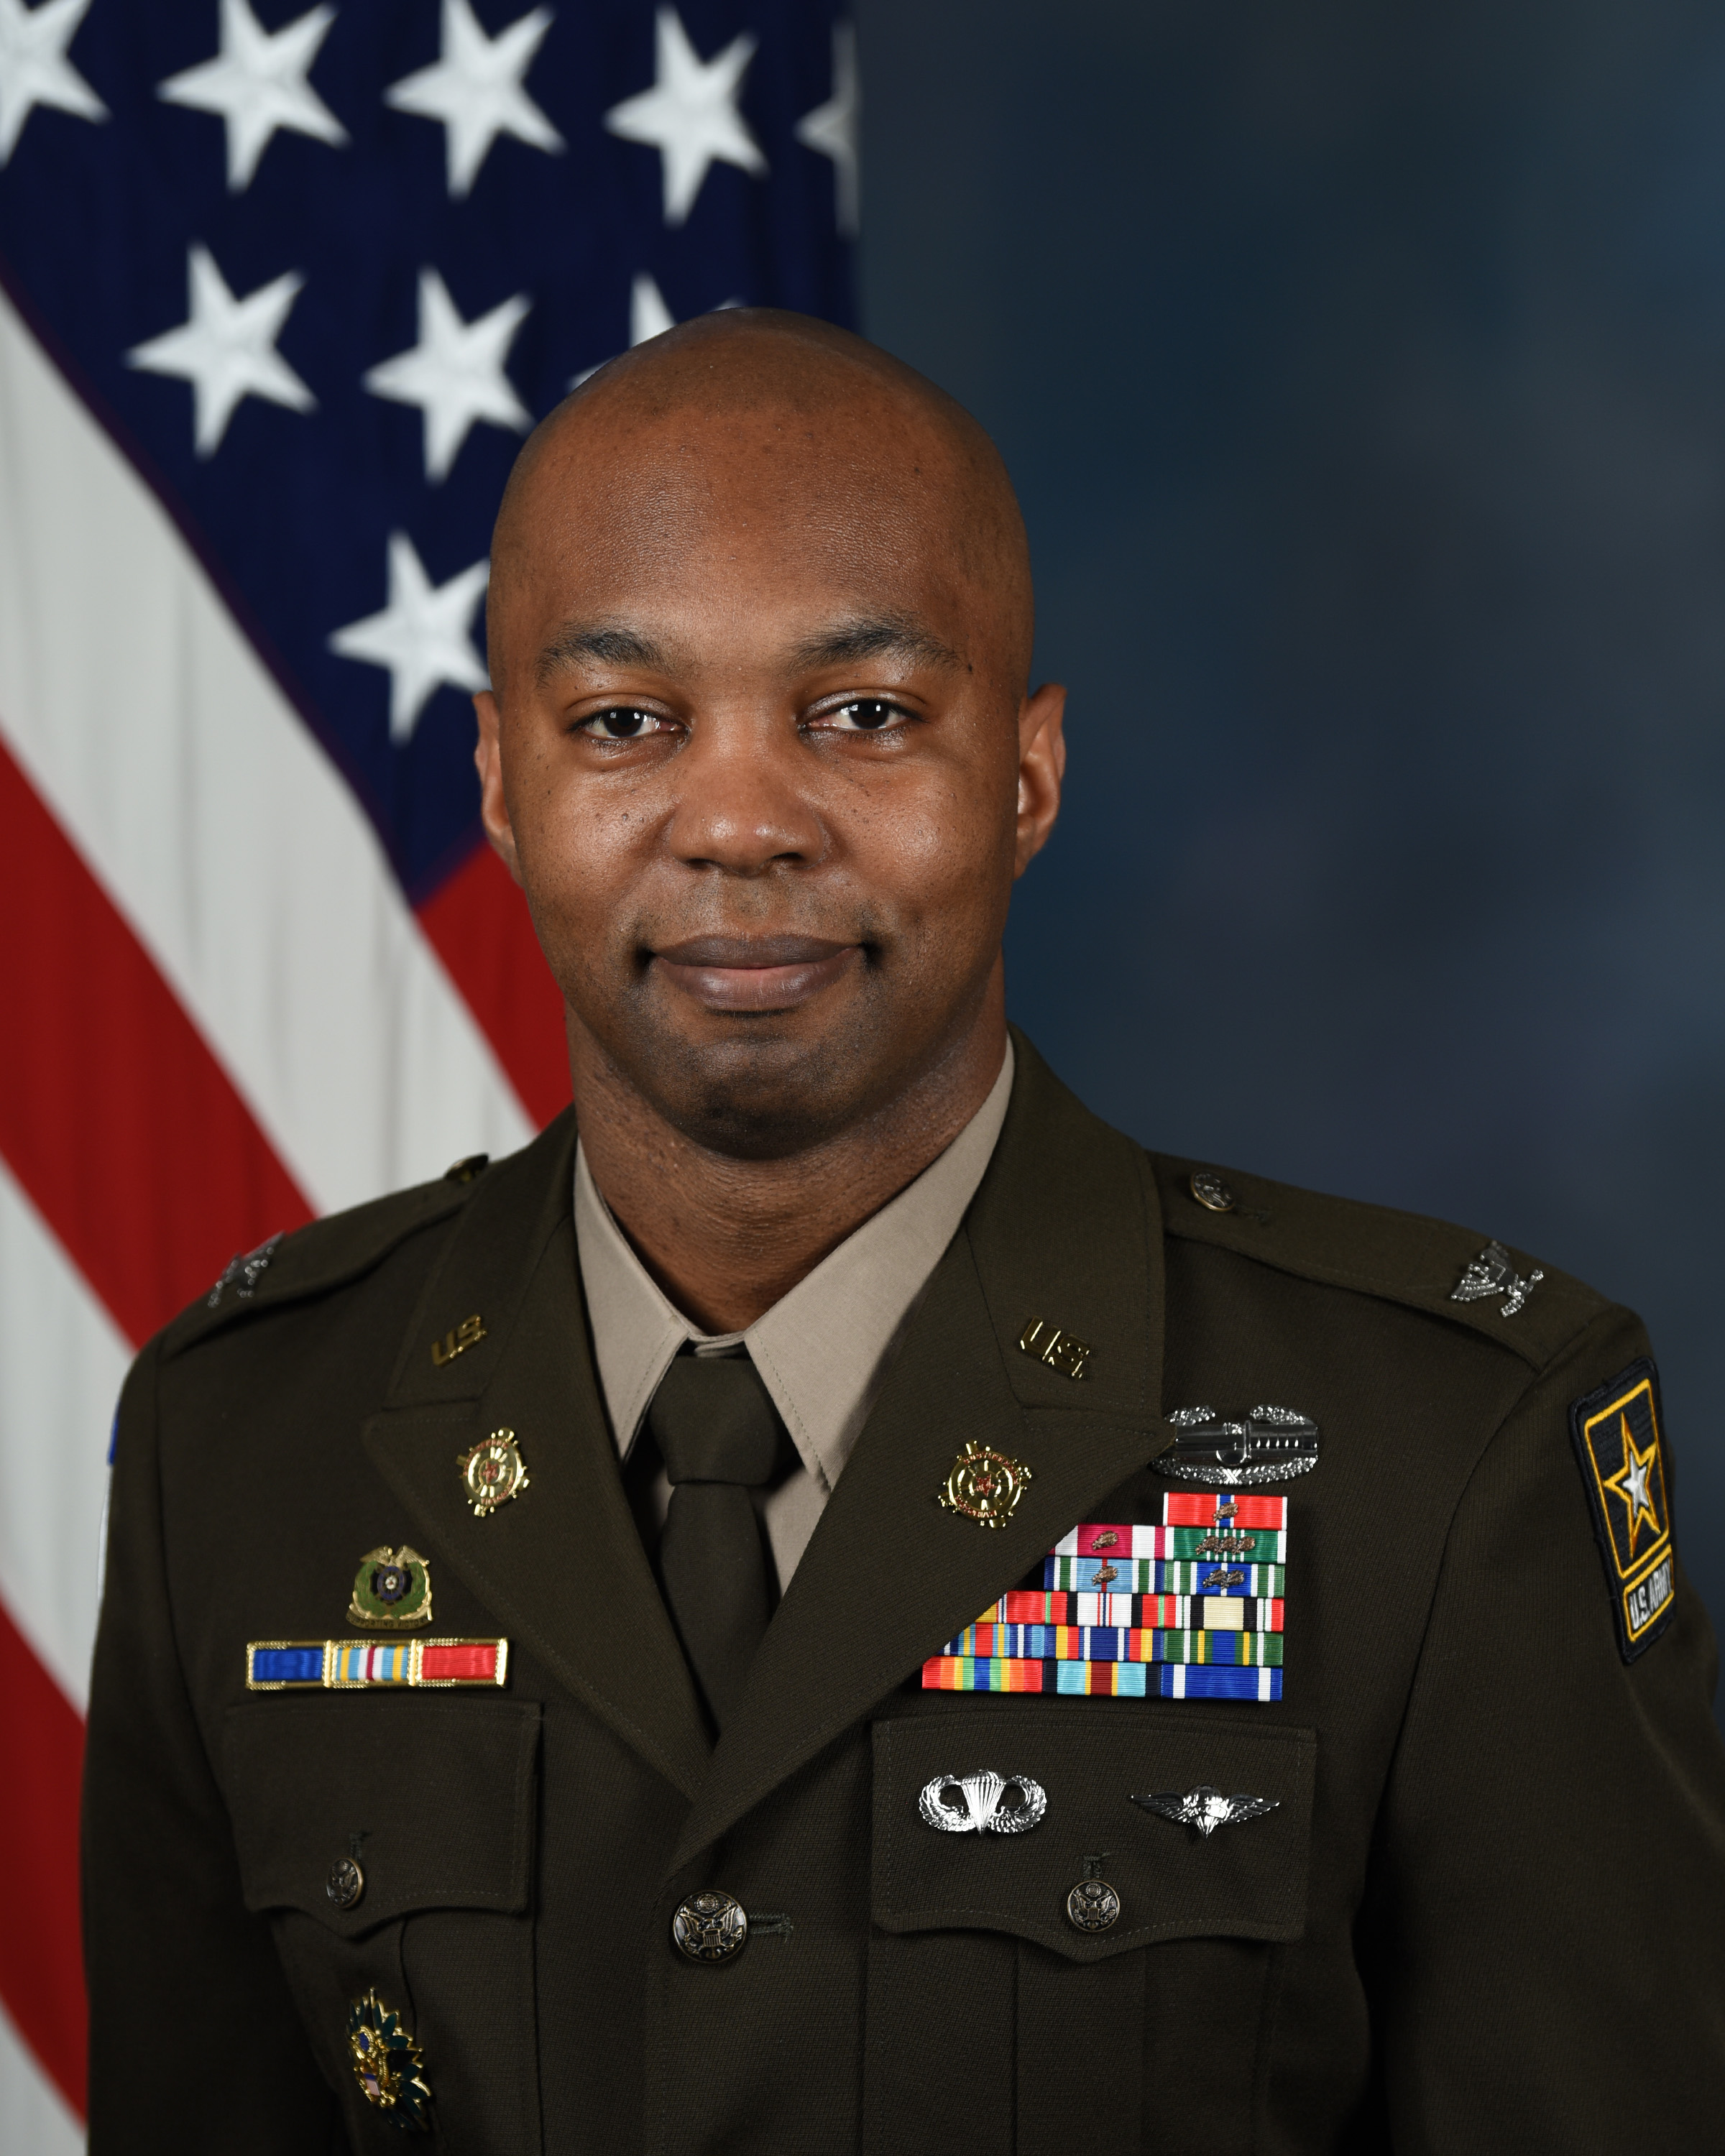 USFK Public Affairs Director - Colonel Isaac L. Taylor